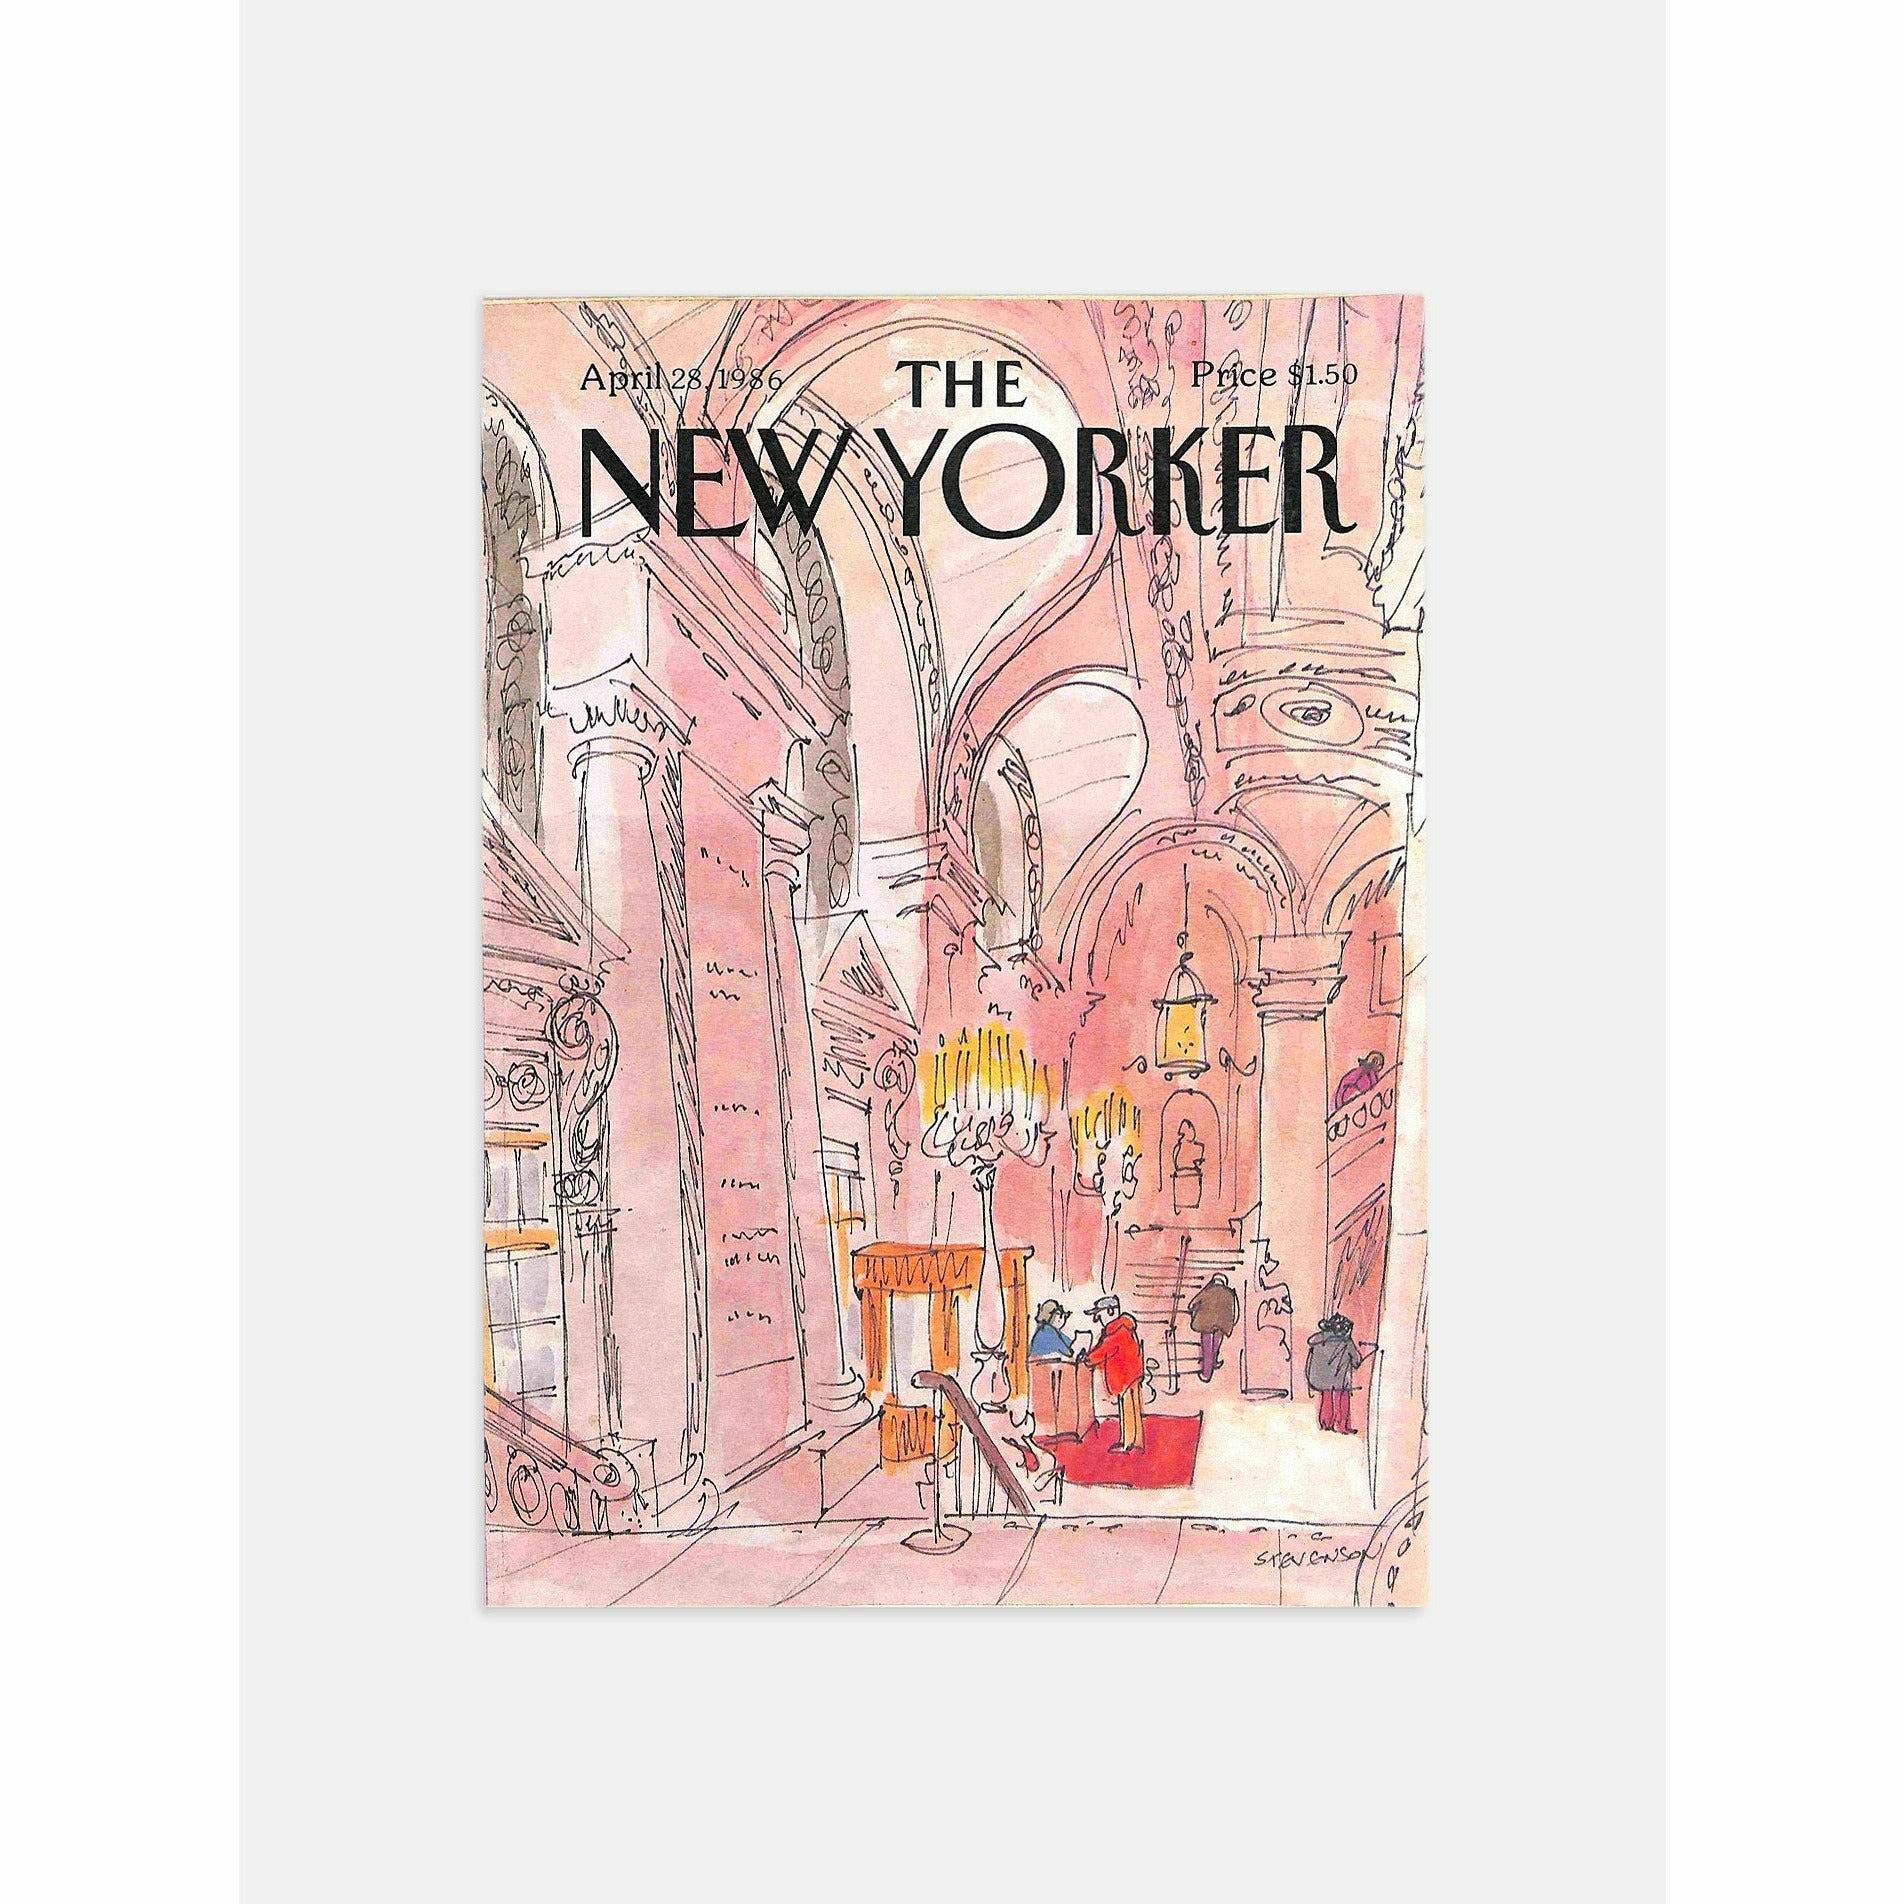 The New Yorker April 28, 1986